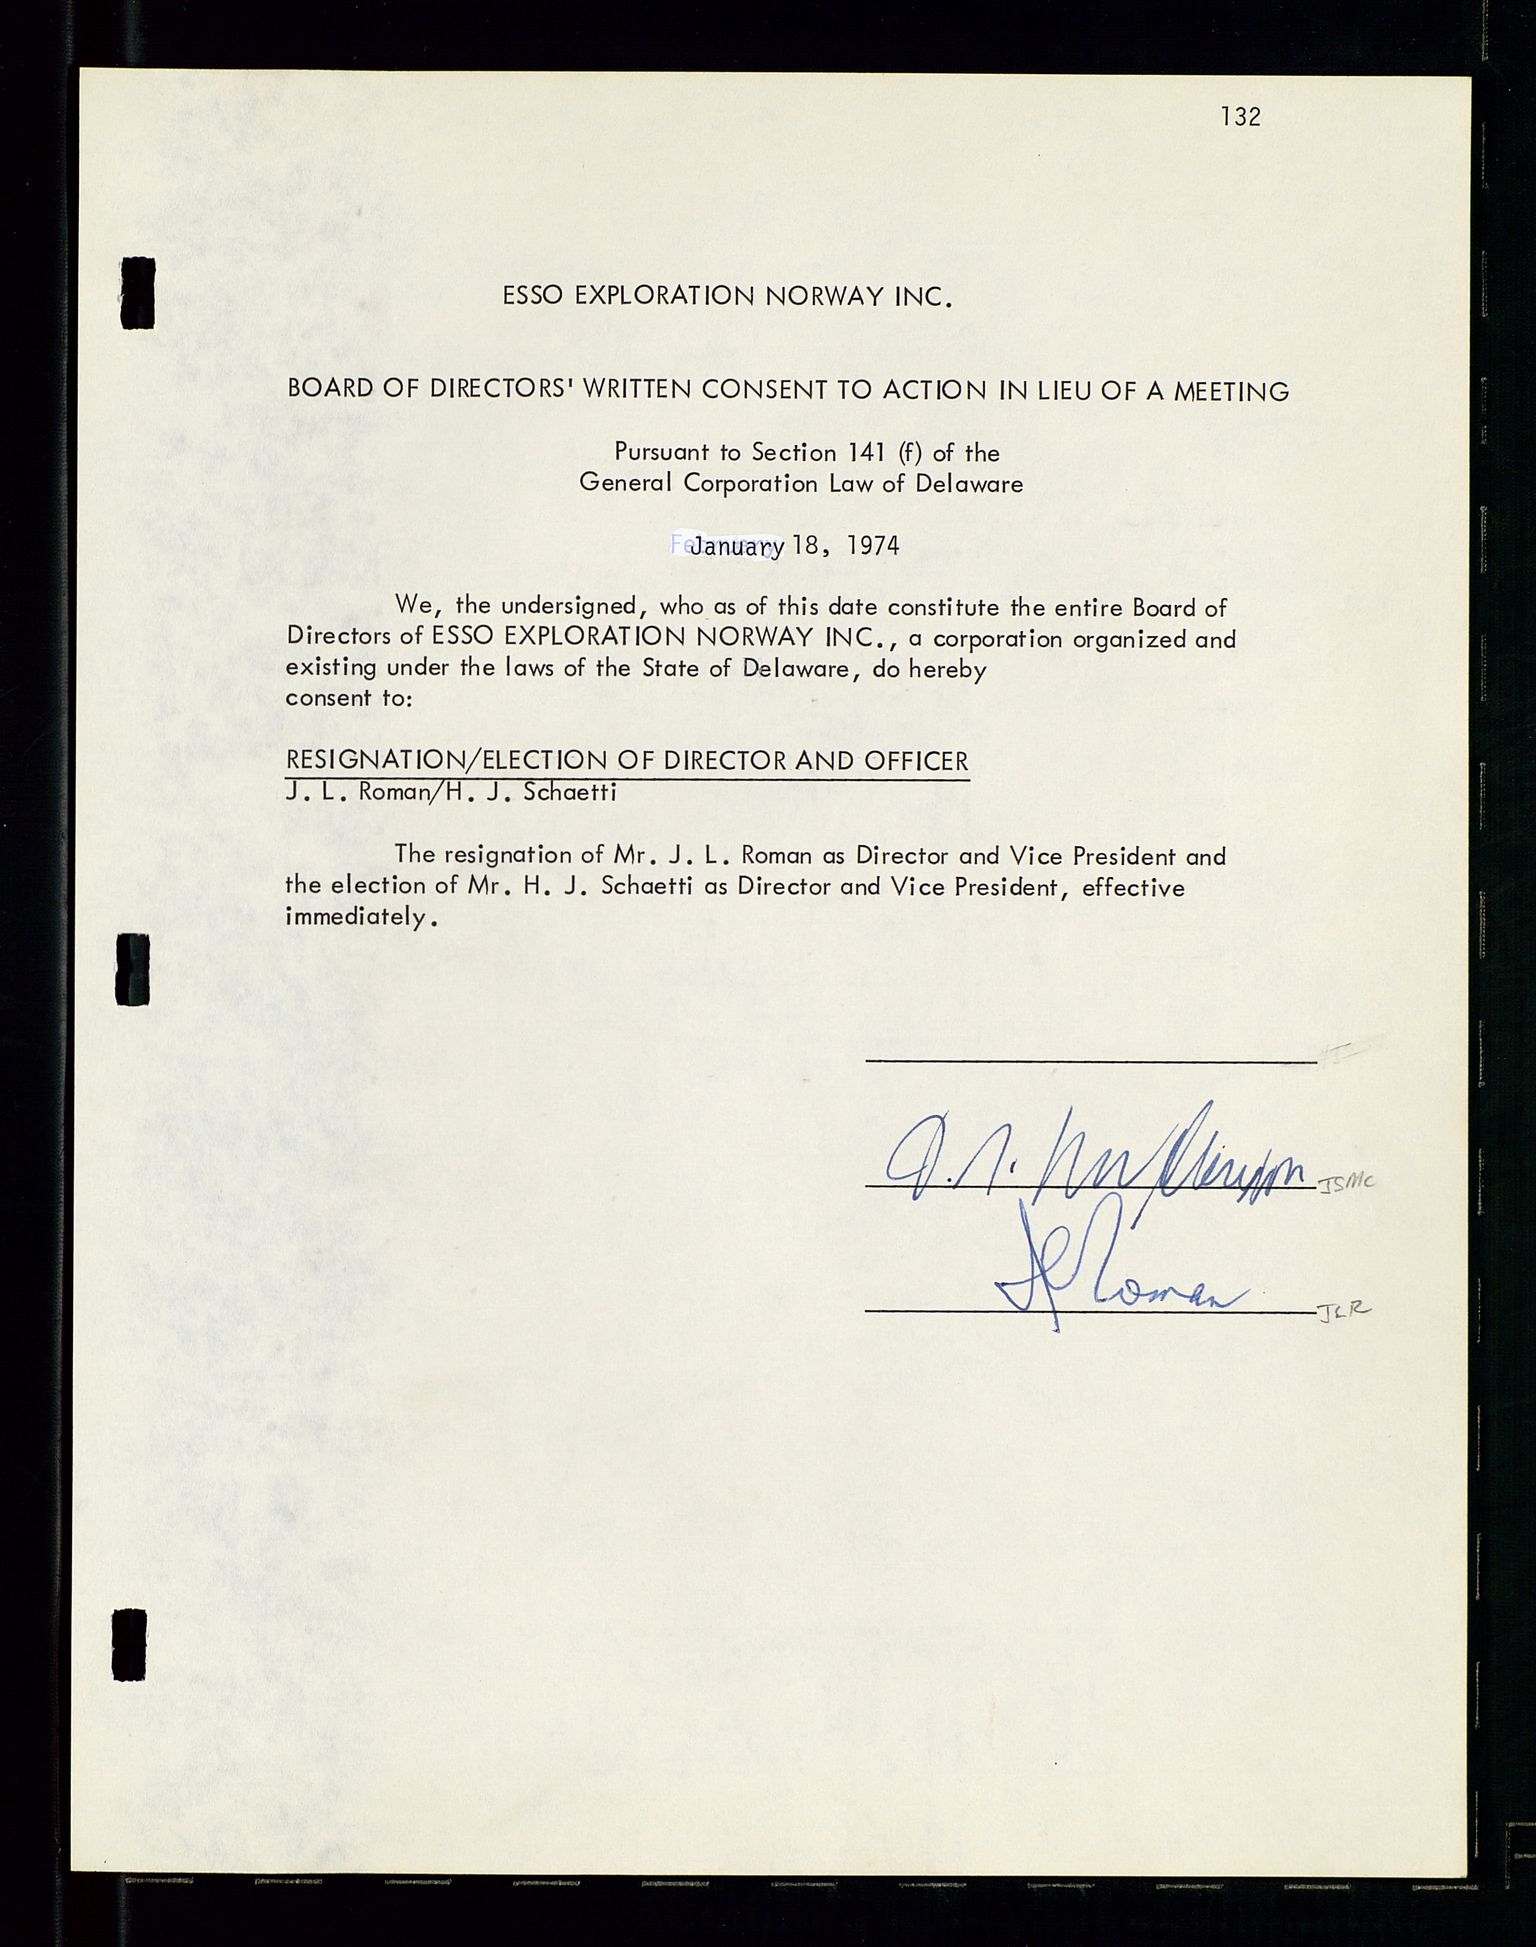 Pa 1512 - Esso Exploration and Production Norway Inc., SAST/A-101917/A/Aa/L0001/0001: Styredokumenter / Corporate records, By-Laws, Board meeting minutes, Incorporations, 1965-1975, p. 132